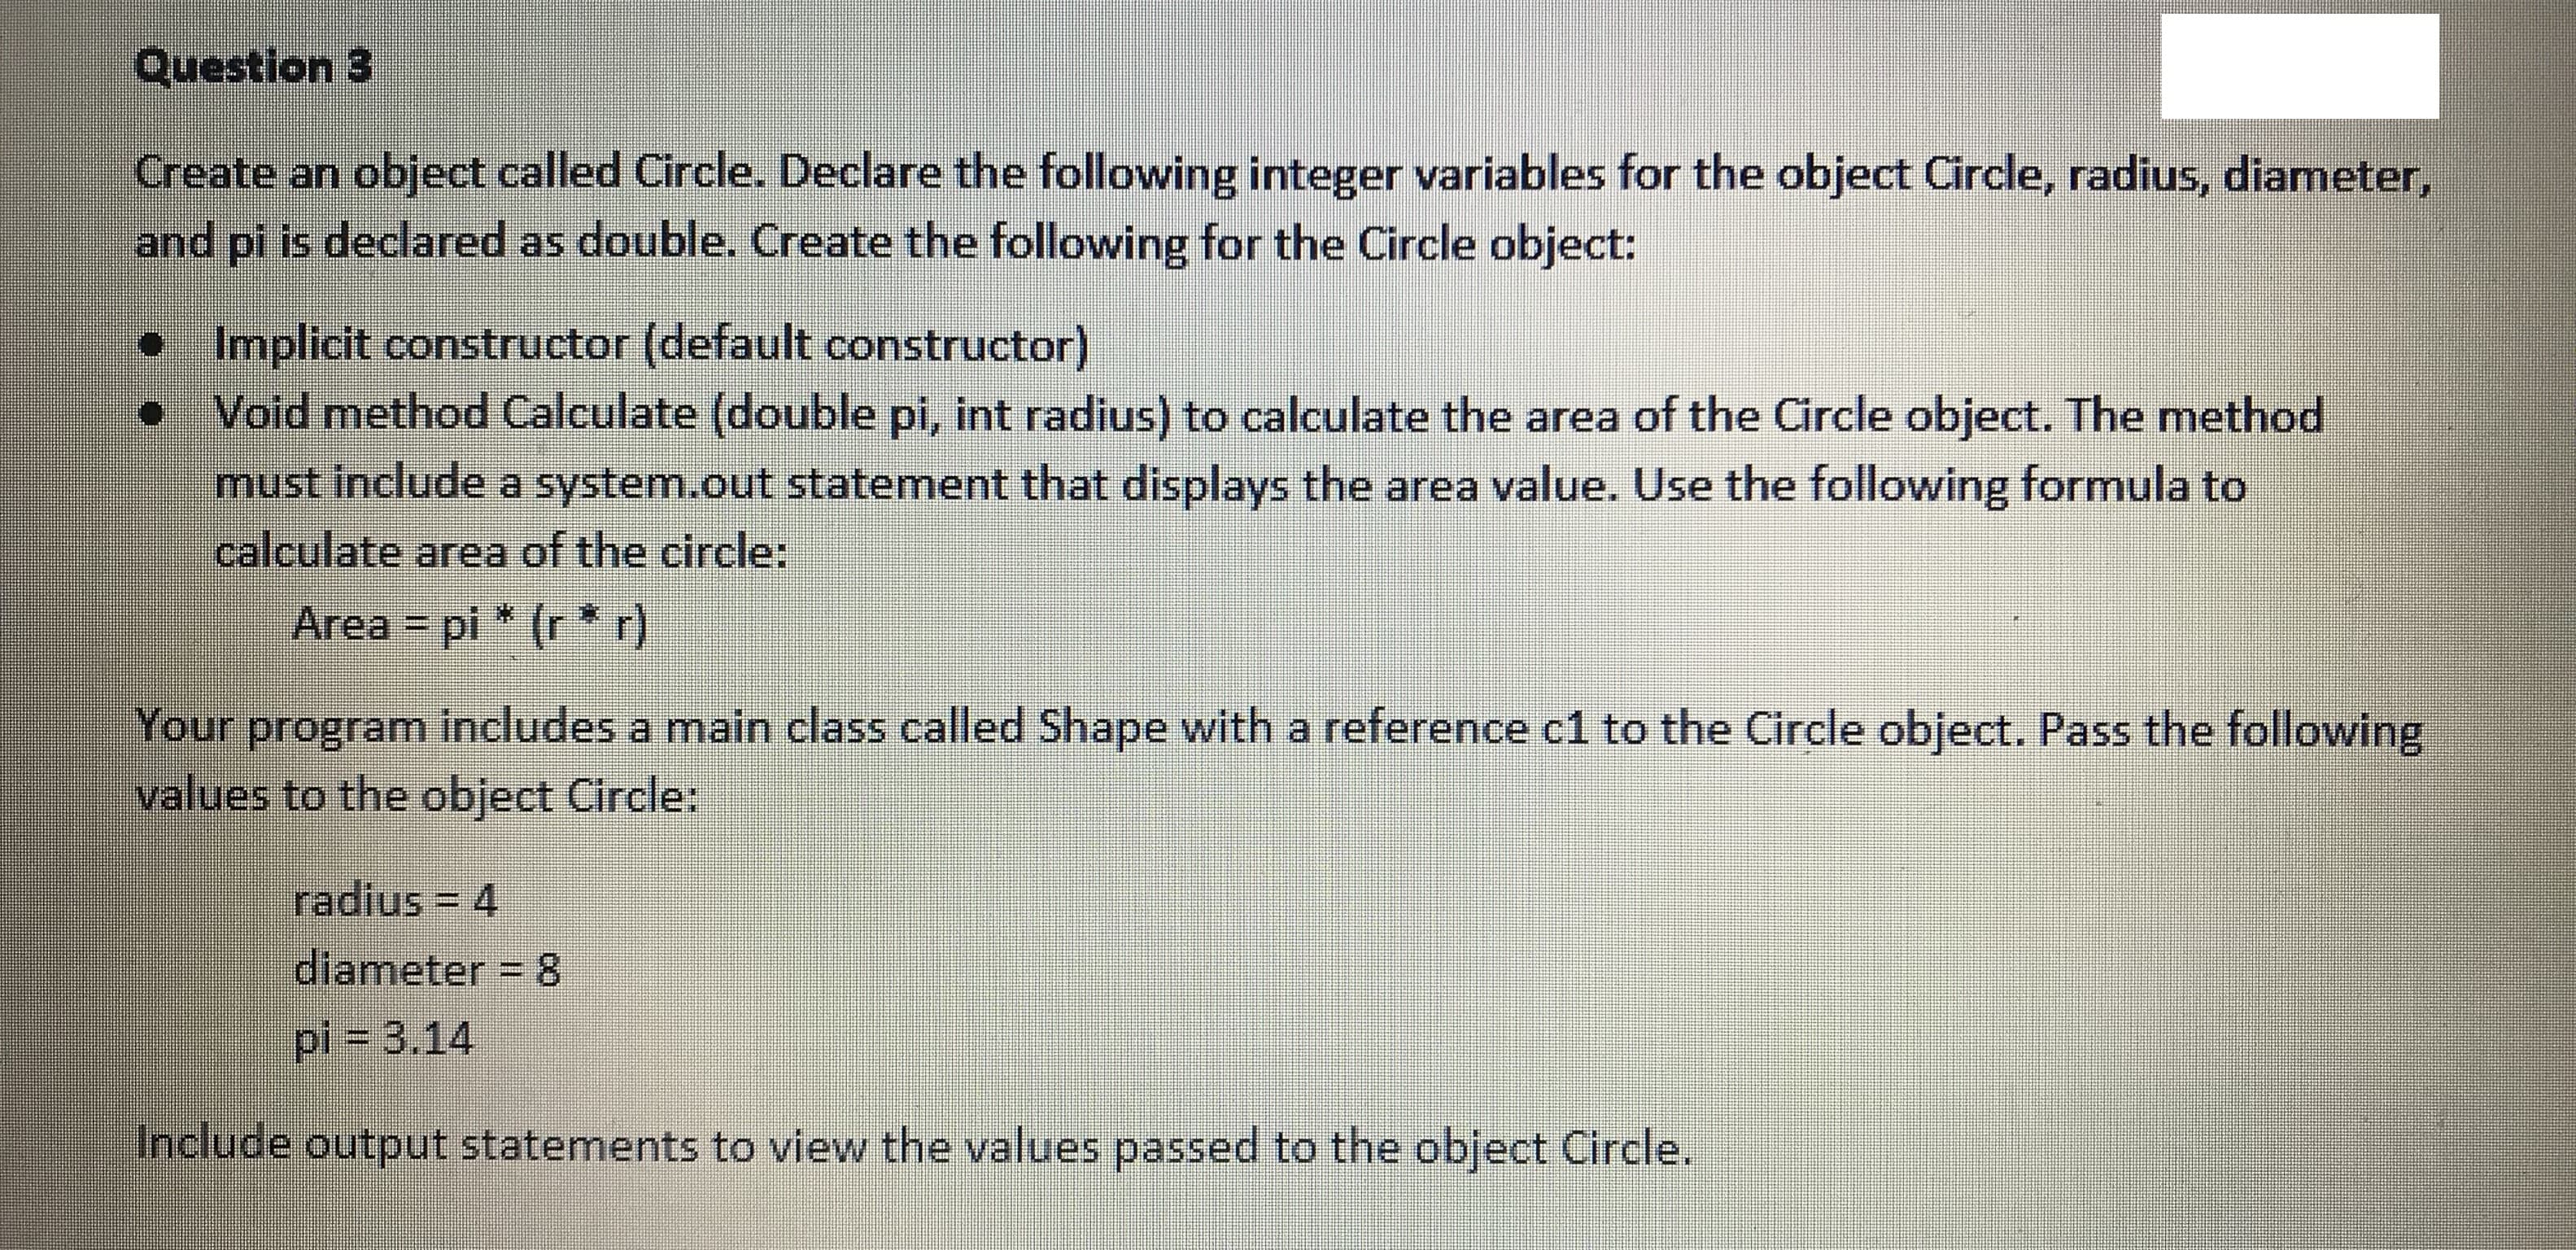 Question 3
Create an object called Circle. Declare the following integer variables for the object Circle, radius, diameter,
and pi is declared as double. Create the following for the Circle object:
•Implicit constructor (default constructor)
Void method Calculate (double pi, int radius) to calculate the area of the Circle object. The method
must include a system.out statement that displays the area value. Use the following formula to
calculate area of the circle:
Area = pi * (r * r)
Your program includes a main class called Shape with a reference c1 to the Circle object. Pass the following,
values to the object Circle:
radius = 4
diameter = 8
pi3D3.14
Include output statements to view the values passed to the object Circle.
